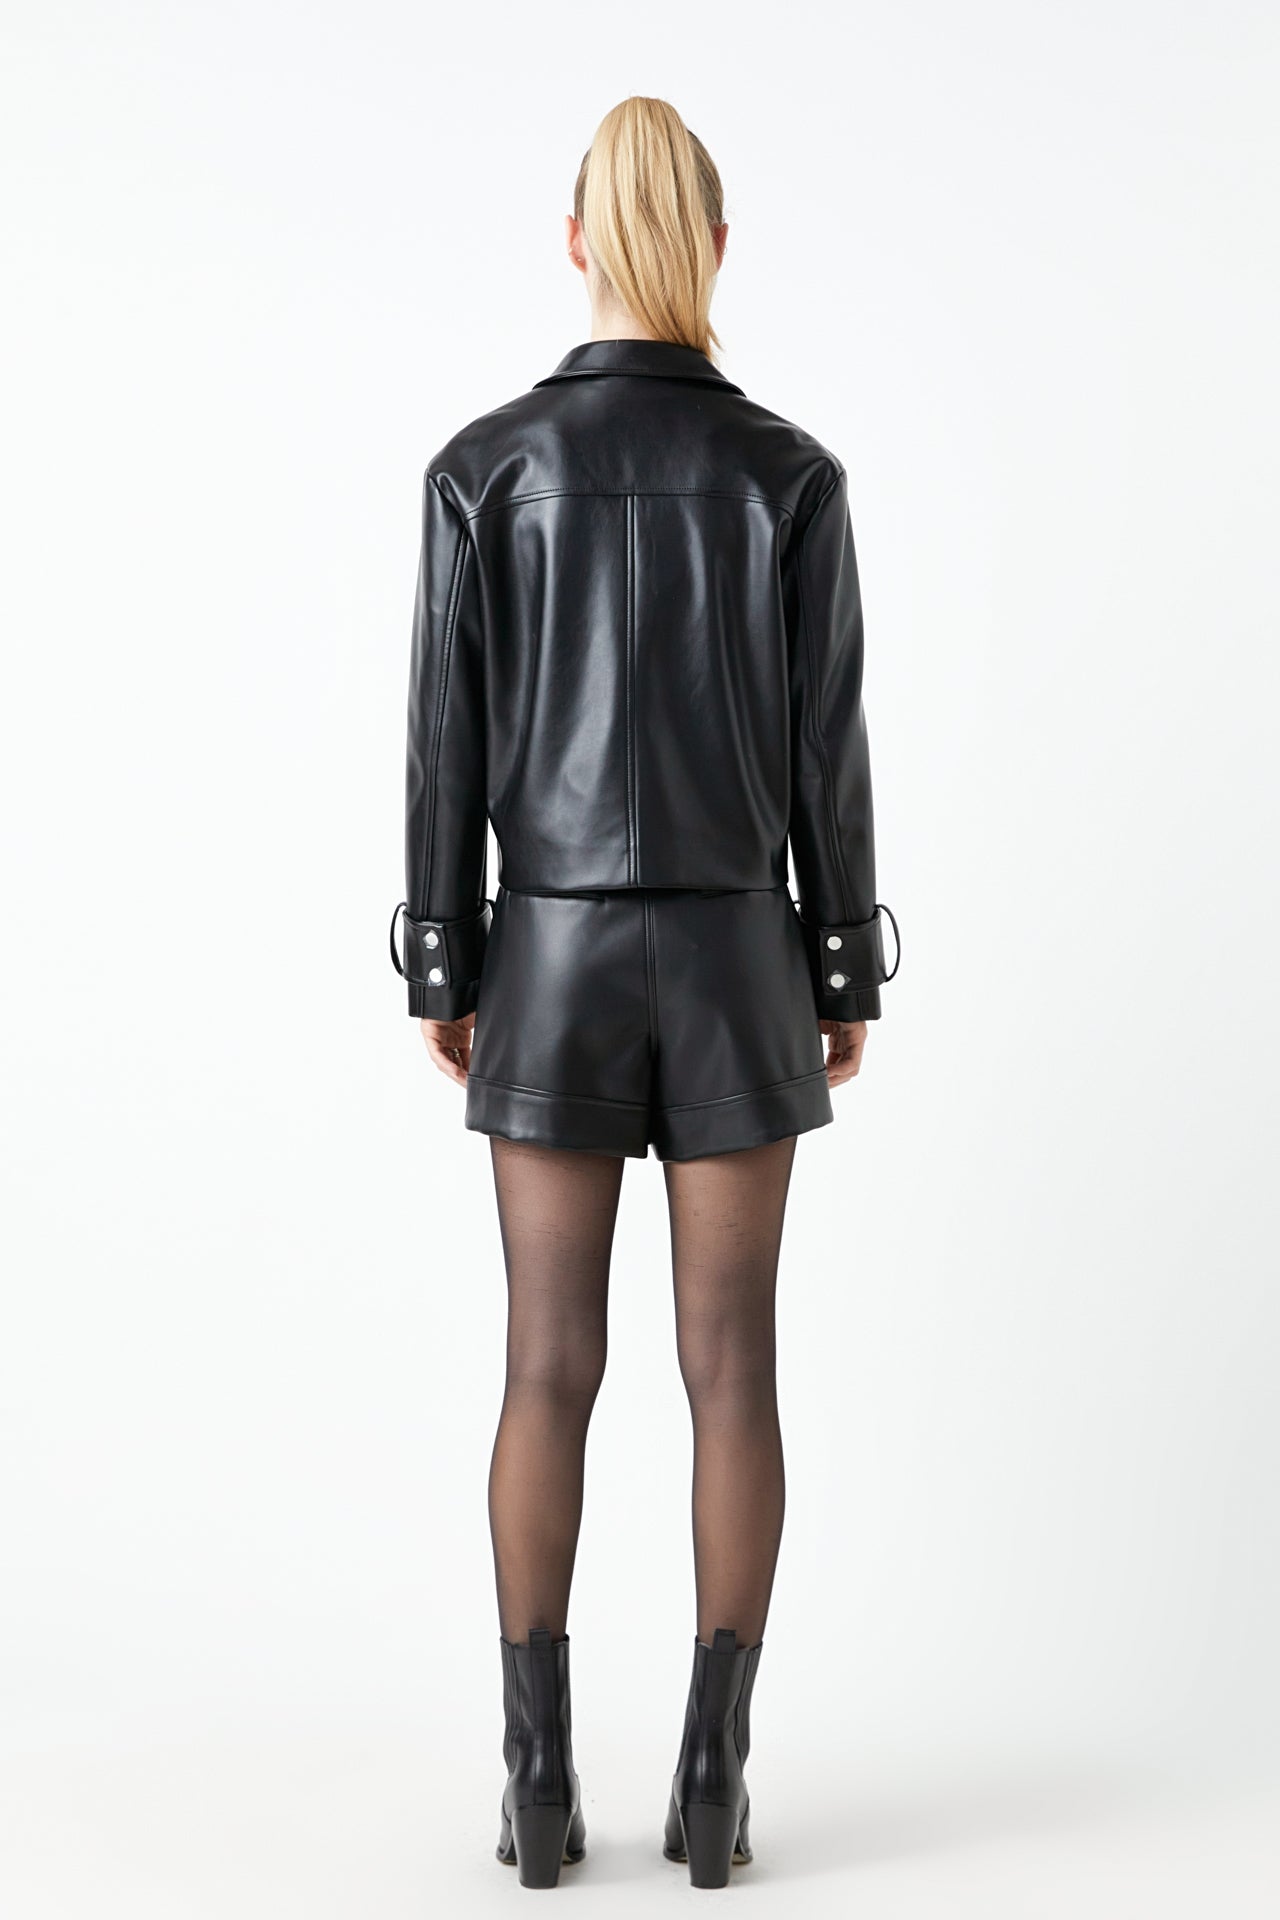 GREY LAB - Zip Up Cropped Faux Leather Jacket - JACKETS available at Objectrare